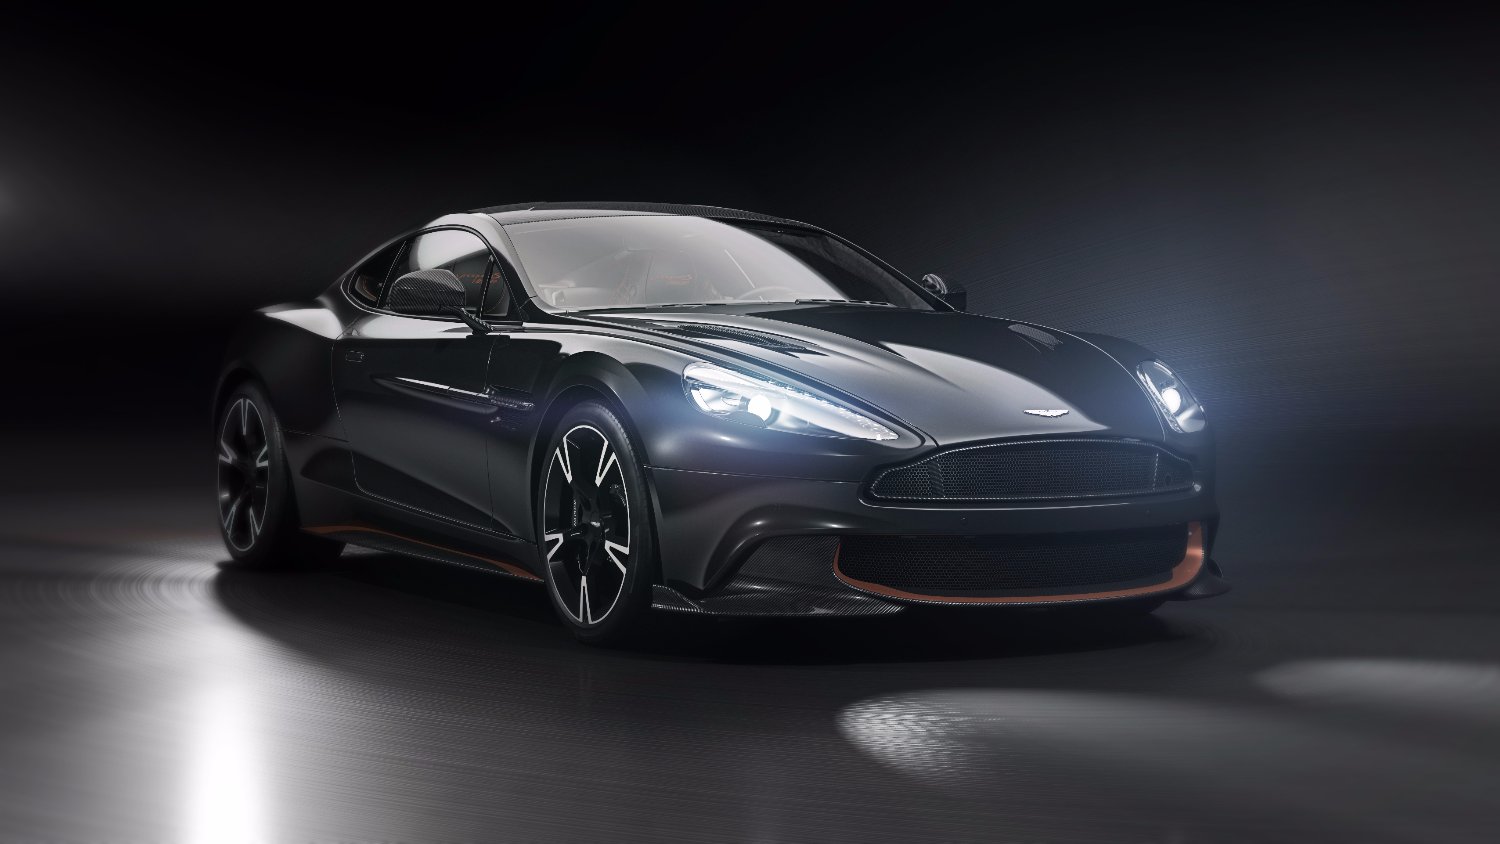 Vanquish S Ultimate: Flagship Super Gt Celebrated With Stunning Special Edition